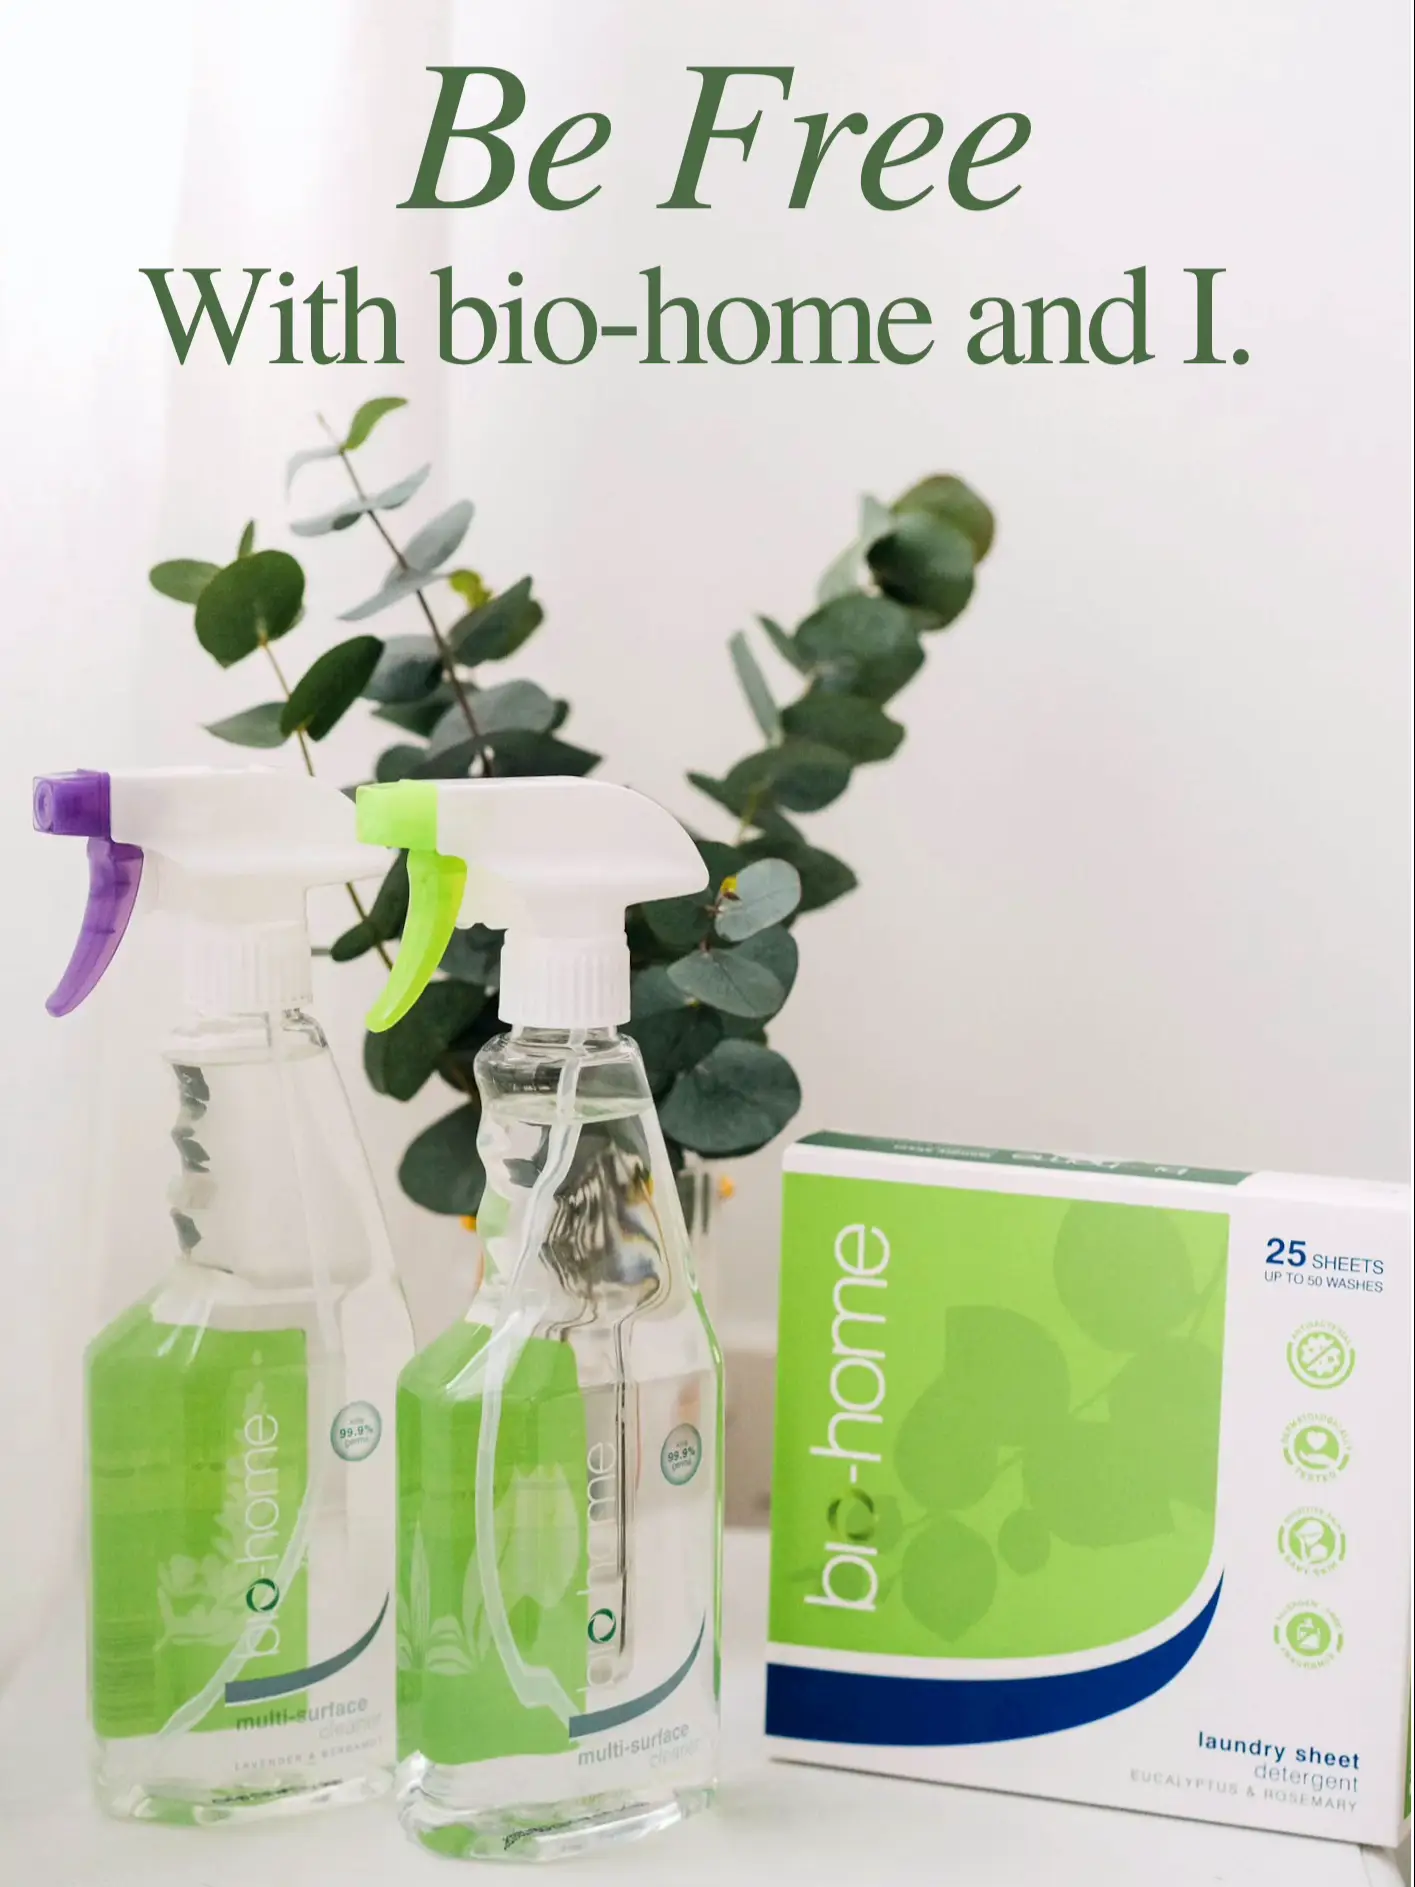 🌟 This Year, I’m Embracing Freedom with Bio-Home!'s images